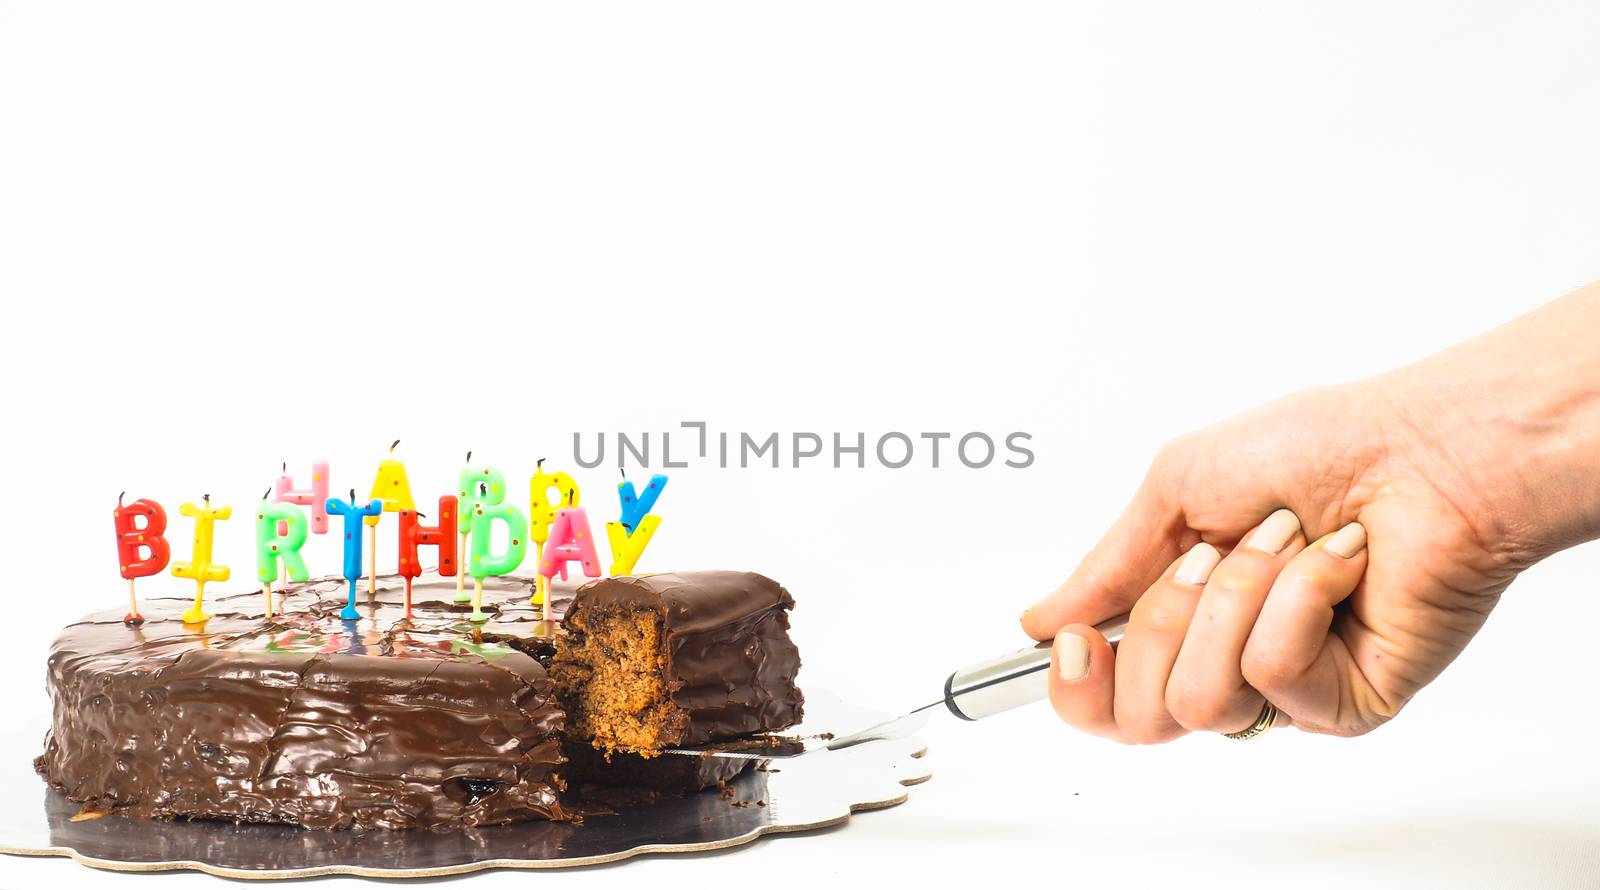 Female person serving a homemade sacher chocolate cake with birthday candles